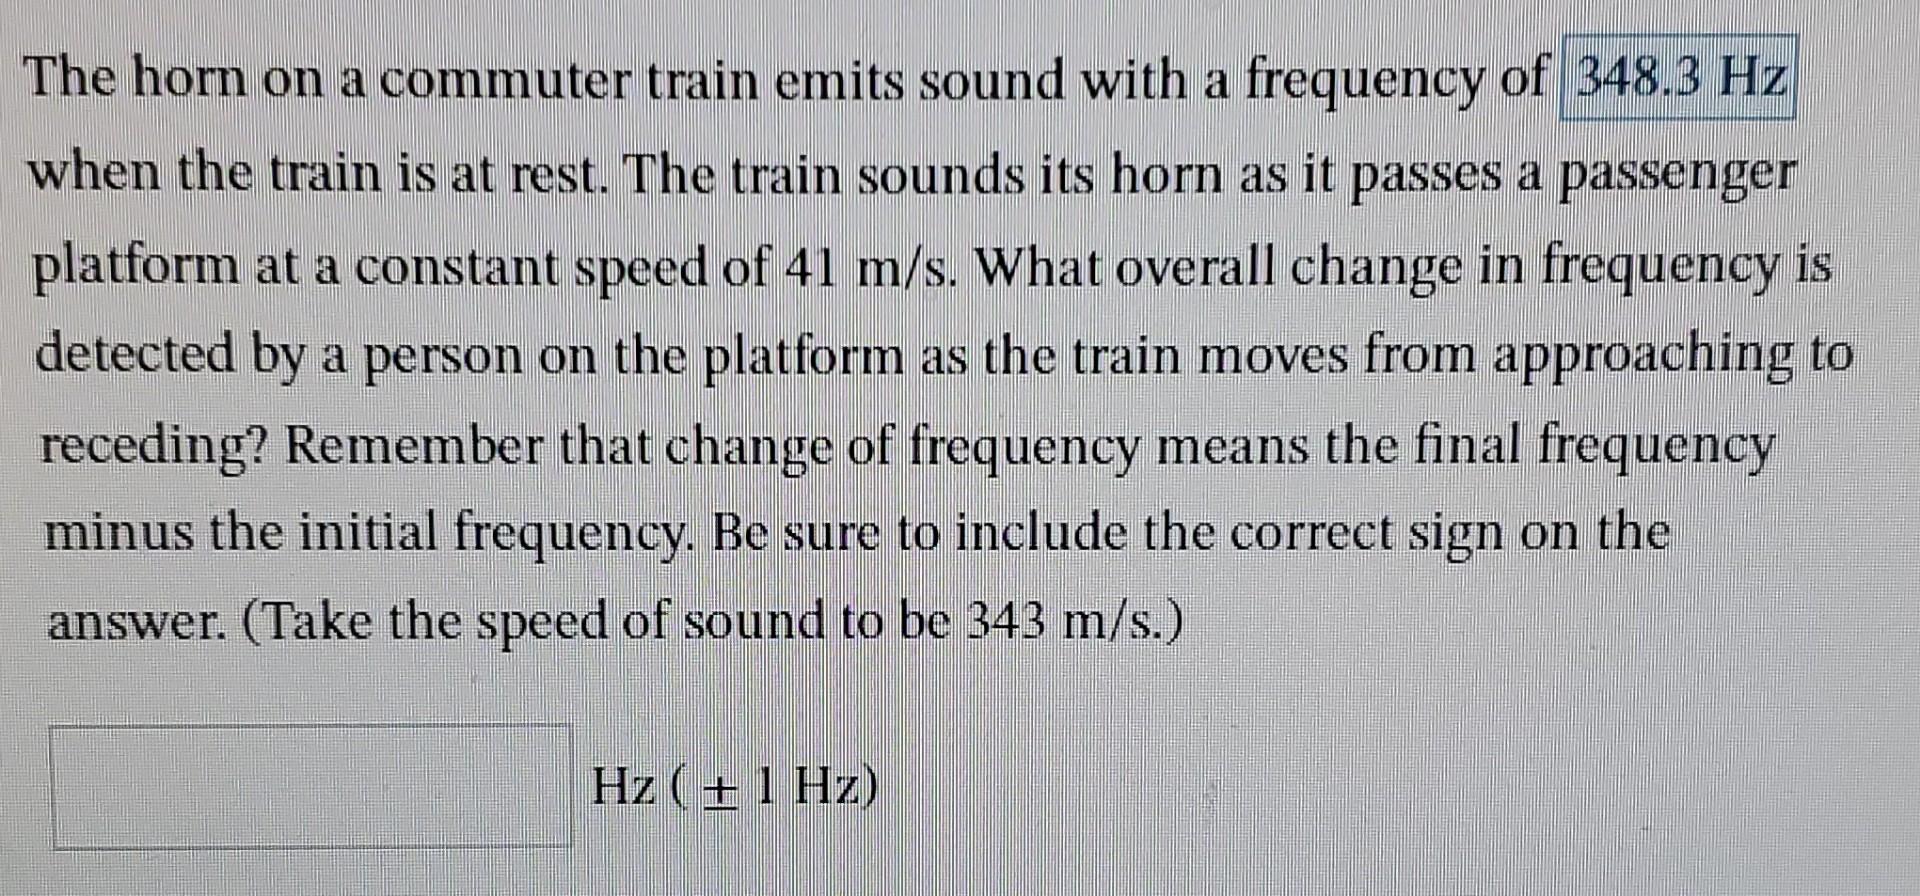 The horn on a commuter train emits sound with a frequency of 348.3 Hz when the train is at rest. The train